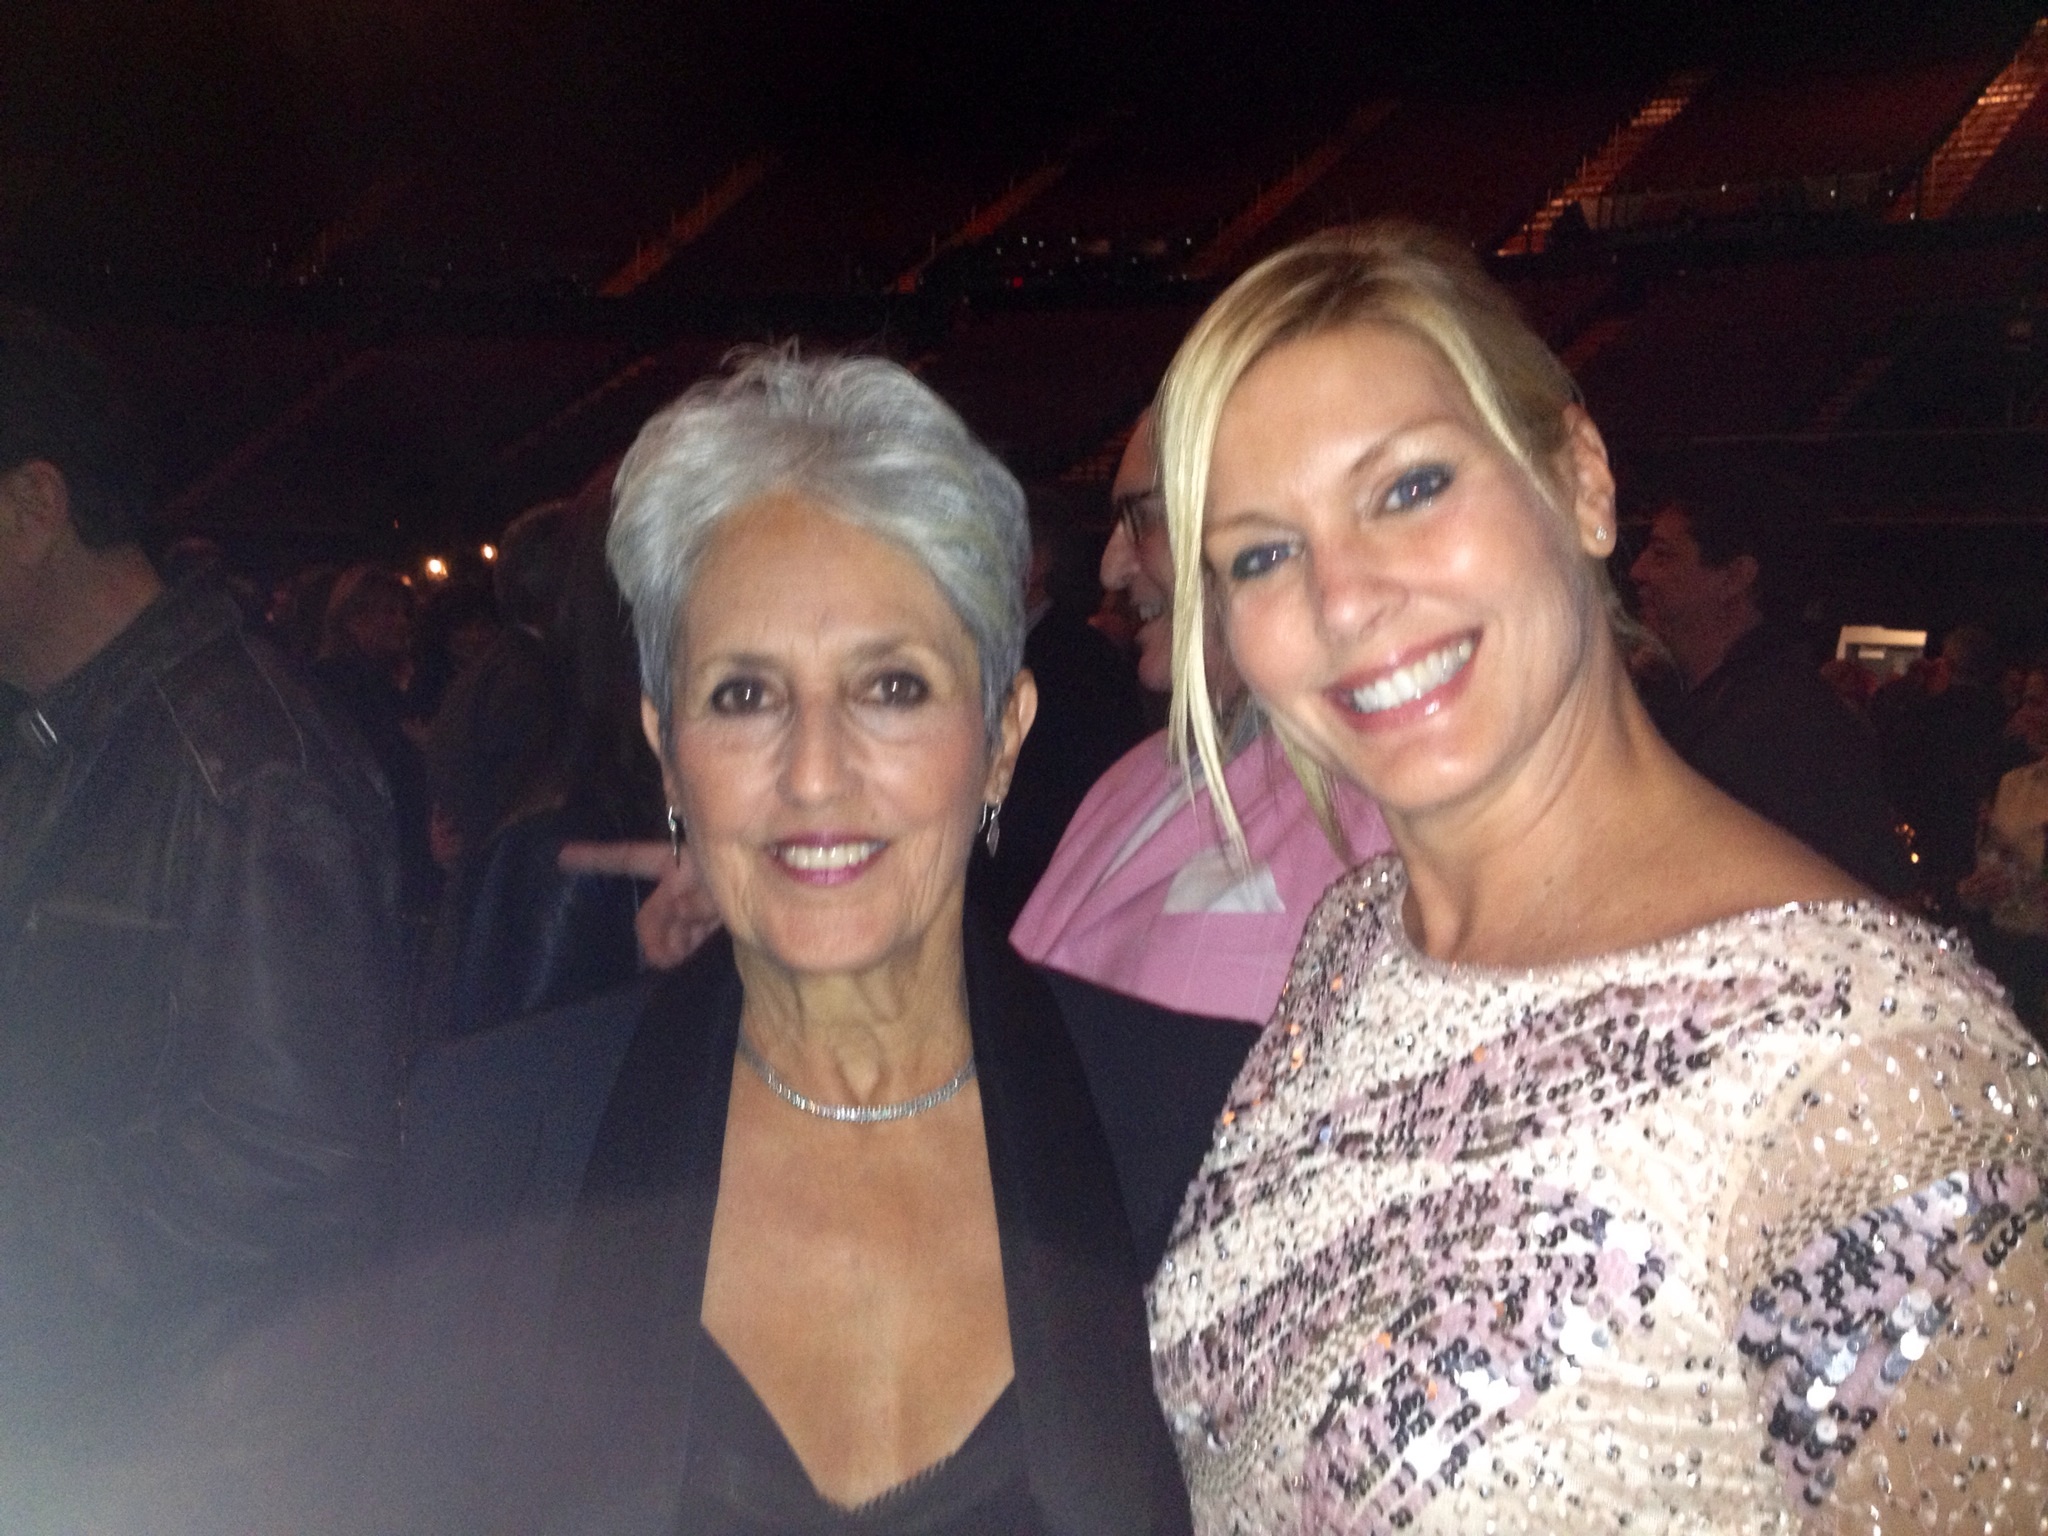 Joan Baez and LaReine Chabut at The NEW Forum Irving Azoff/Peter Grosslight Cancer Fundraiser